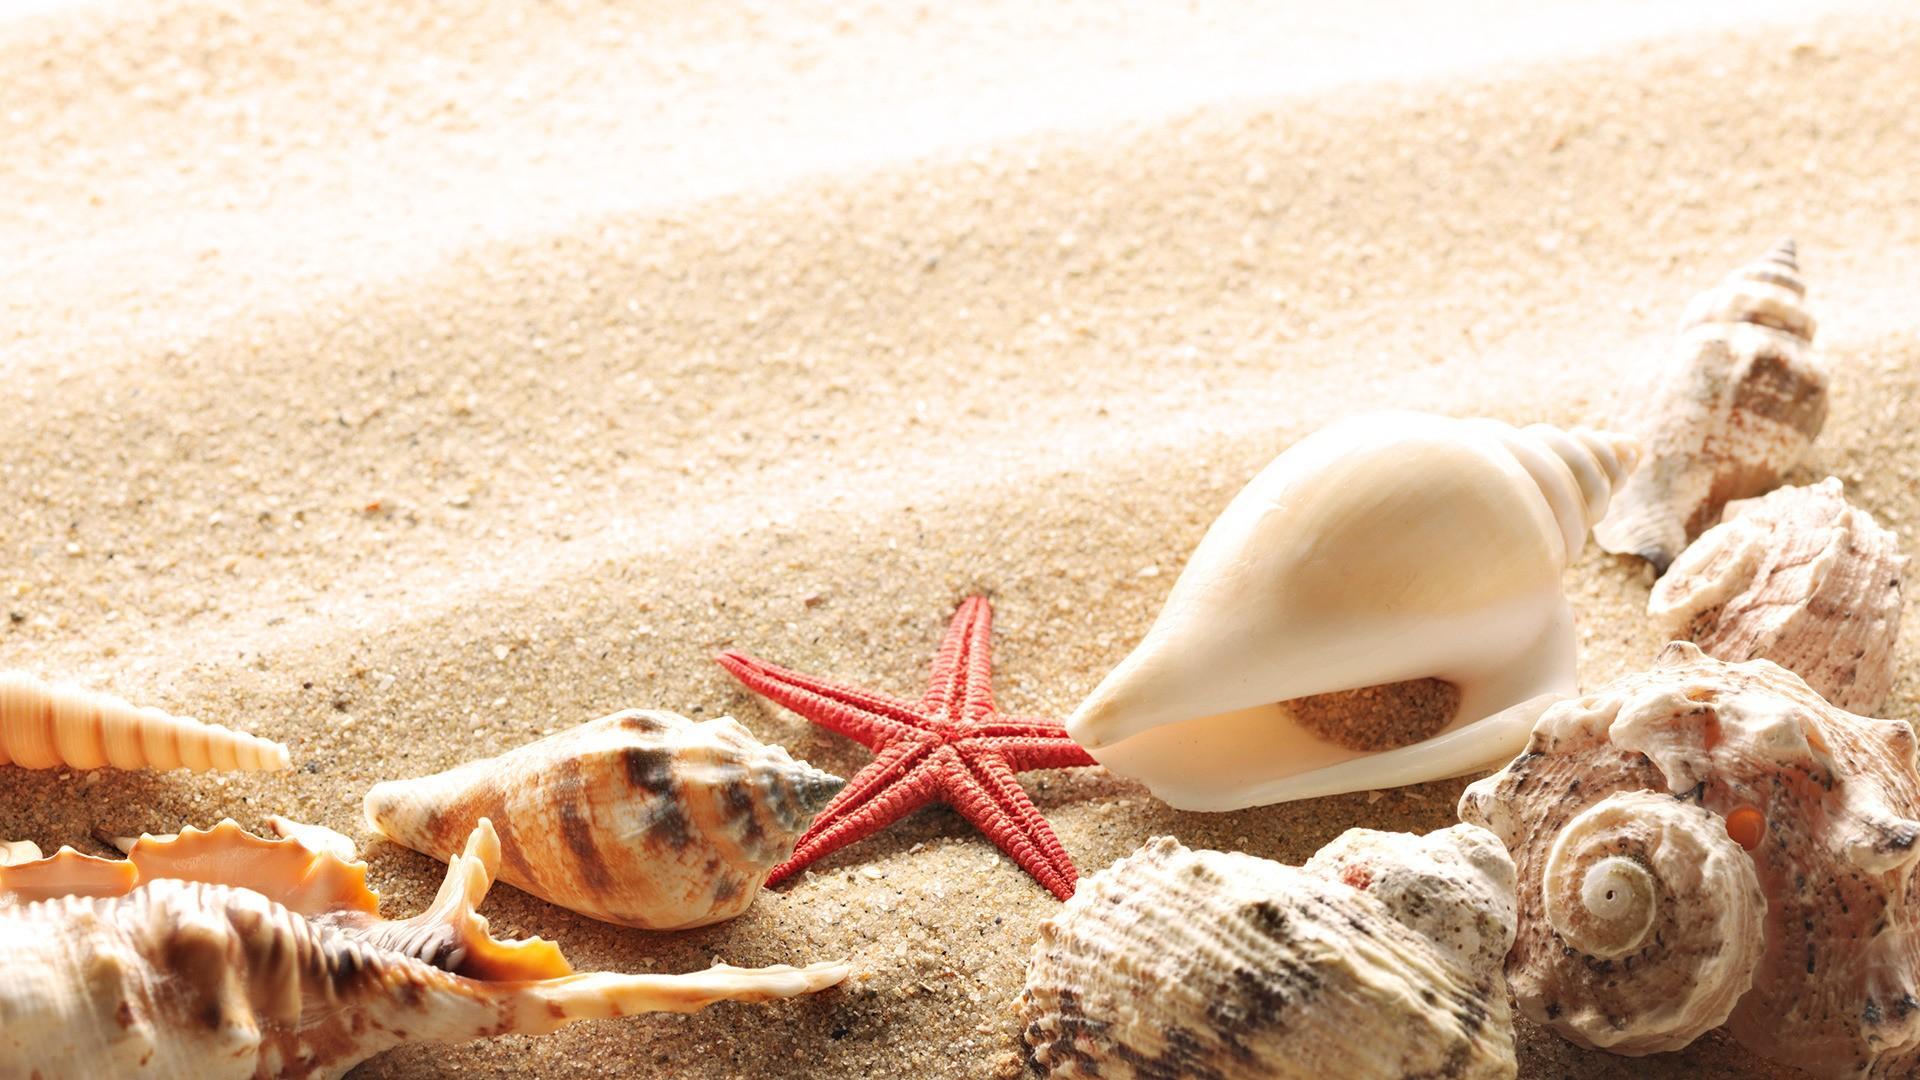 Shell HD Wallpapers